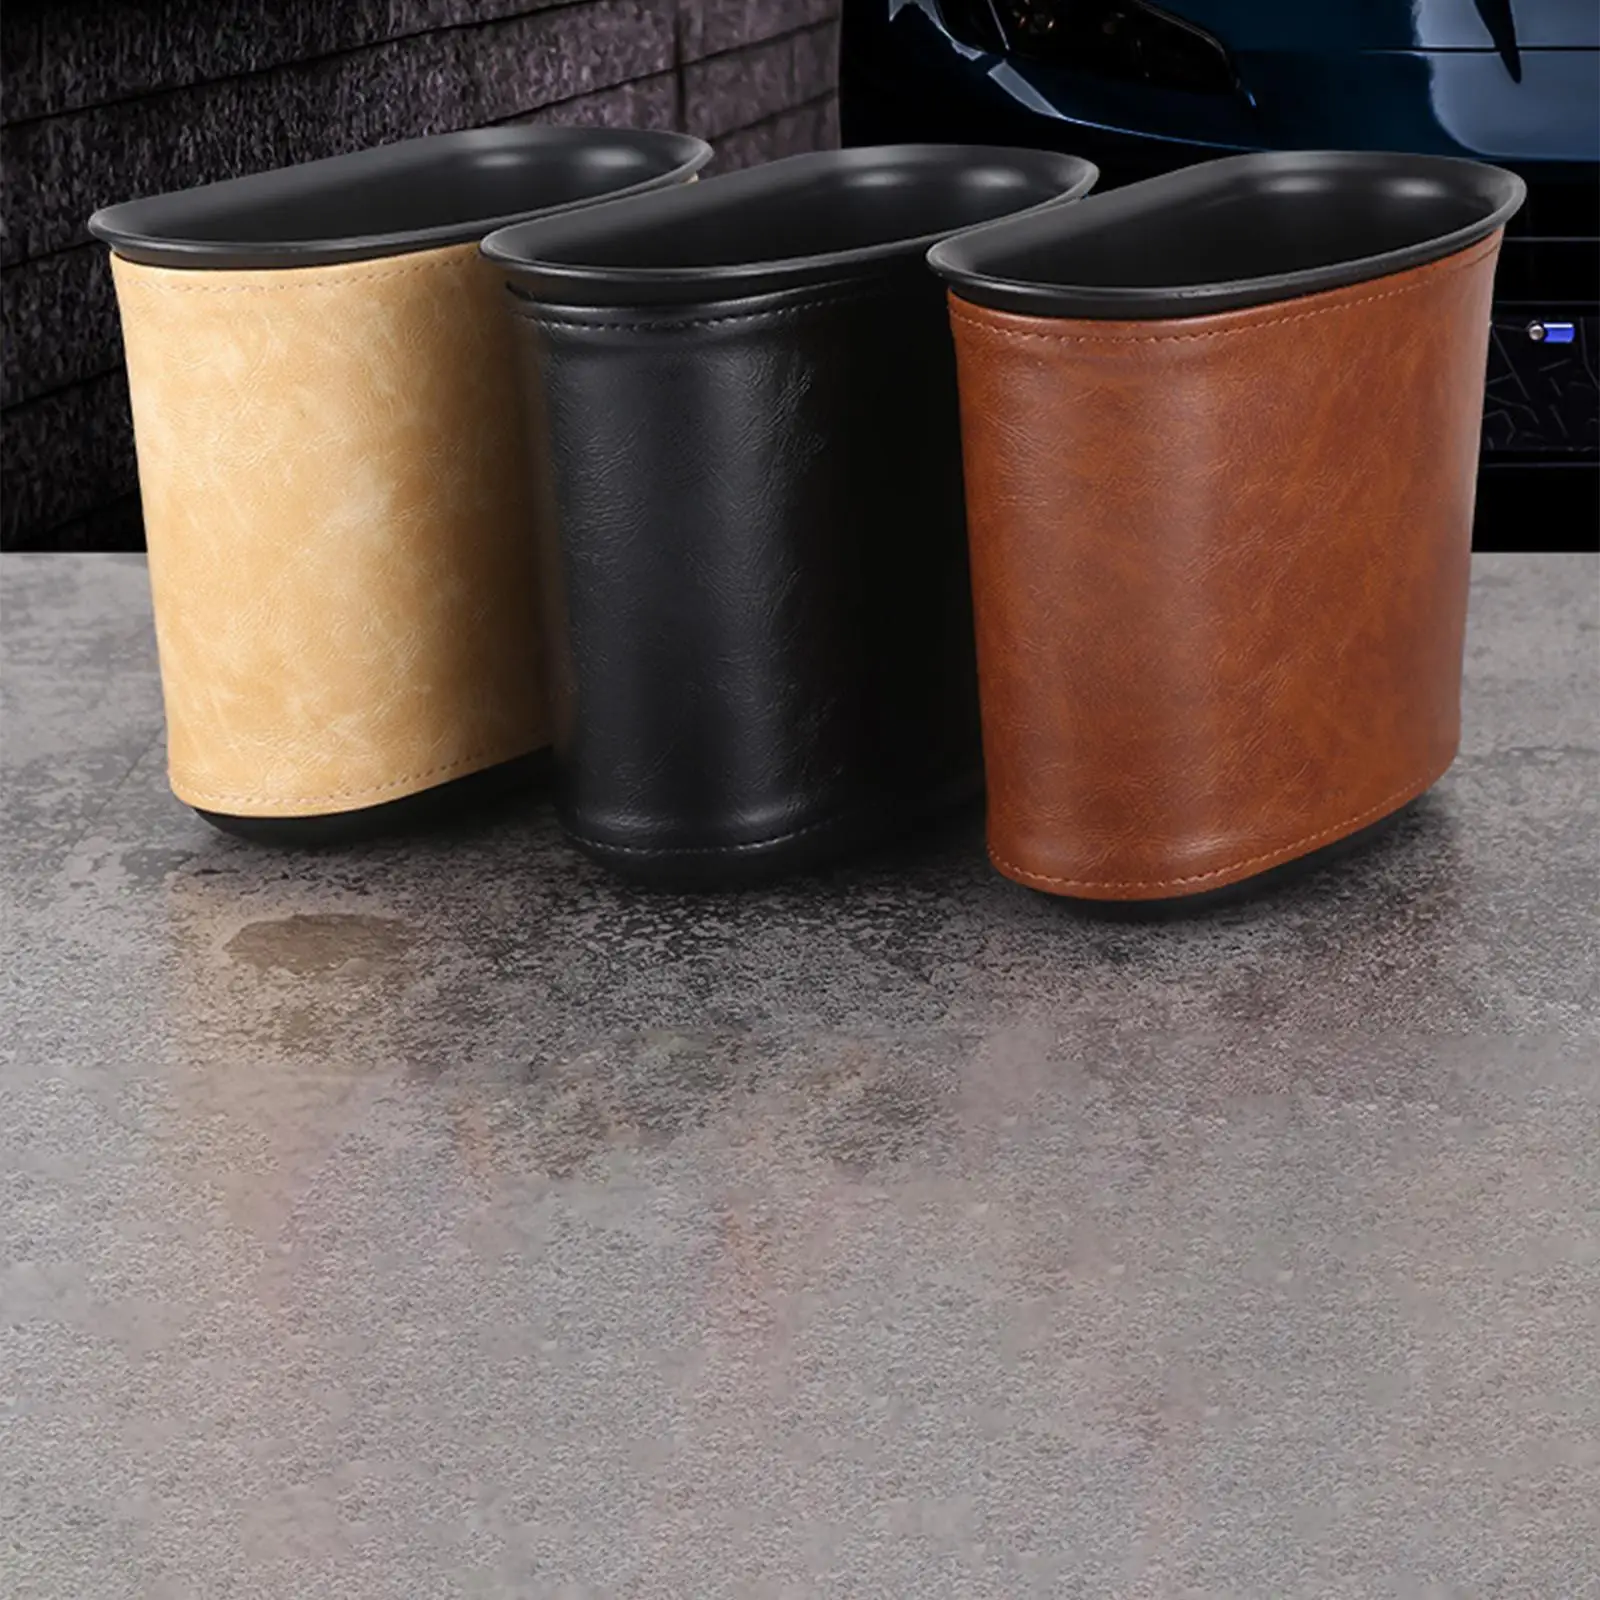 Leather Car Trash Can Bin Portable Garbage Dump Hanging Bag for Outdoor